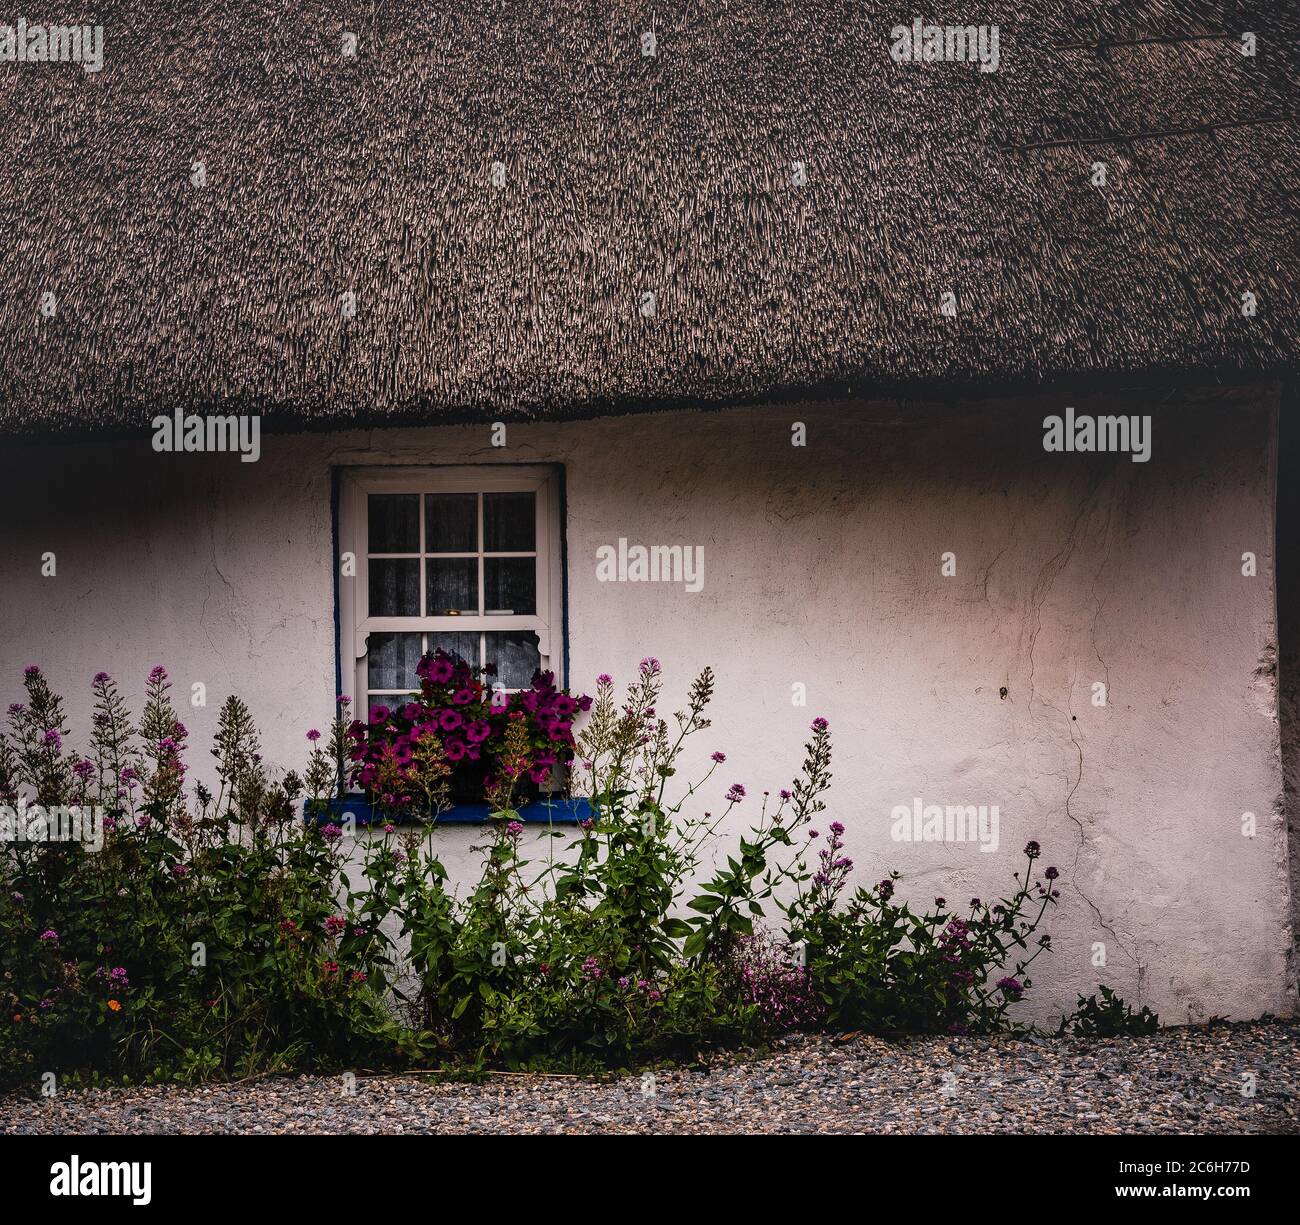 Facade or exterior of a classic Irish cottage house with a straw roof and some flowers at the window. Kilmore Quay, County Wexford, Ireland Stock Photo